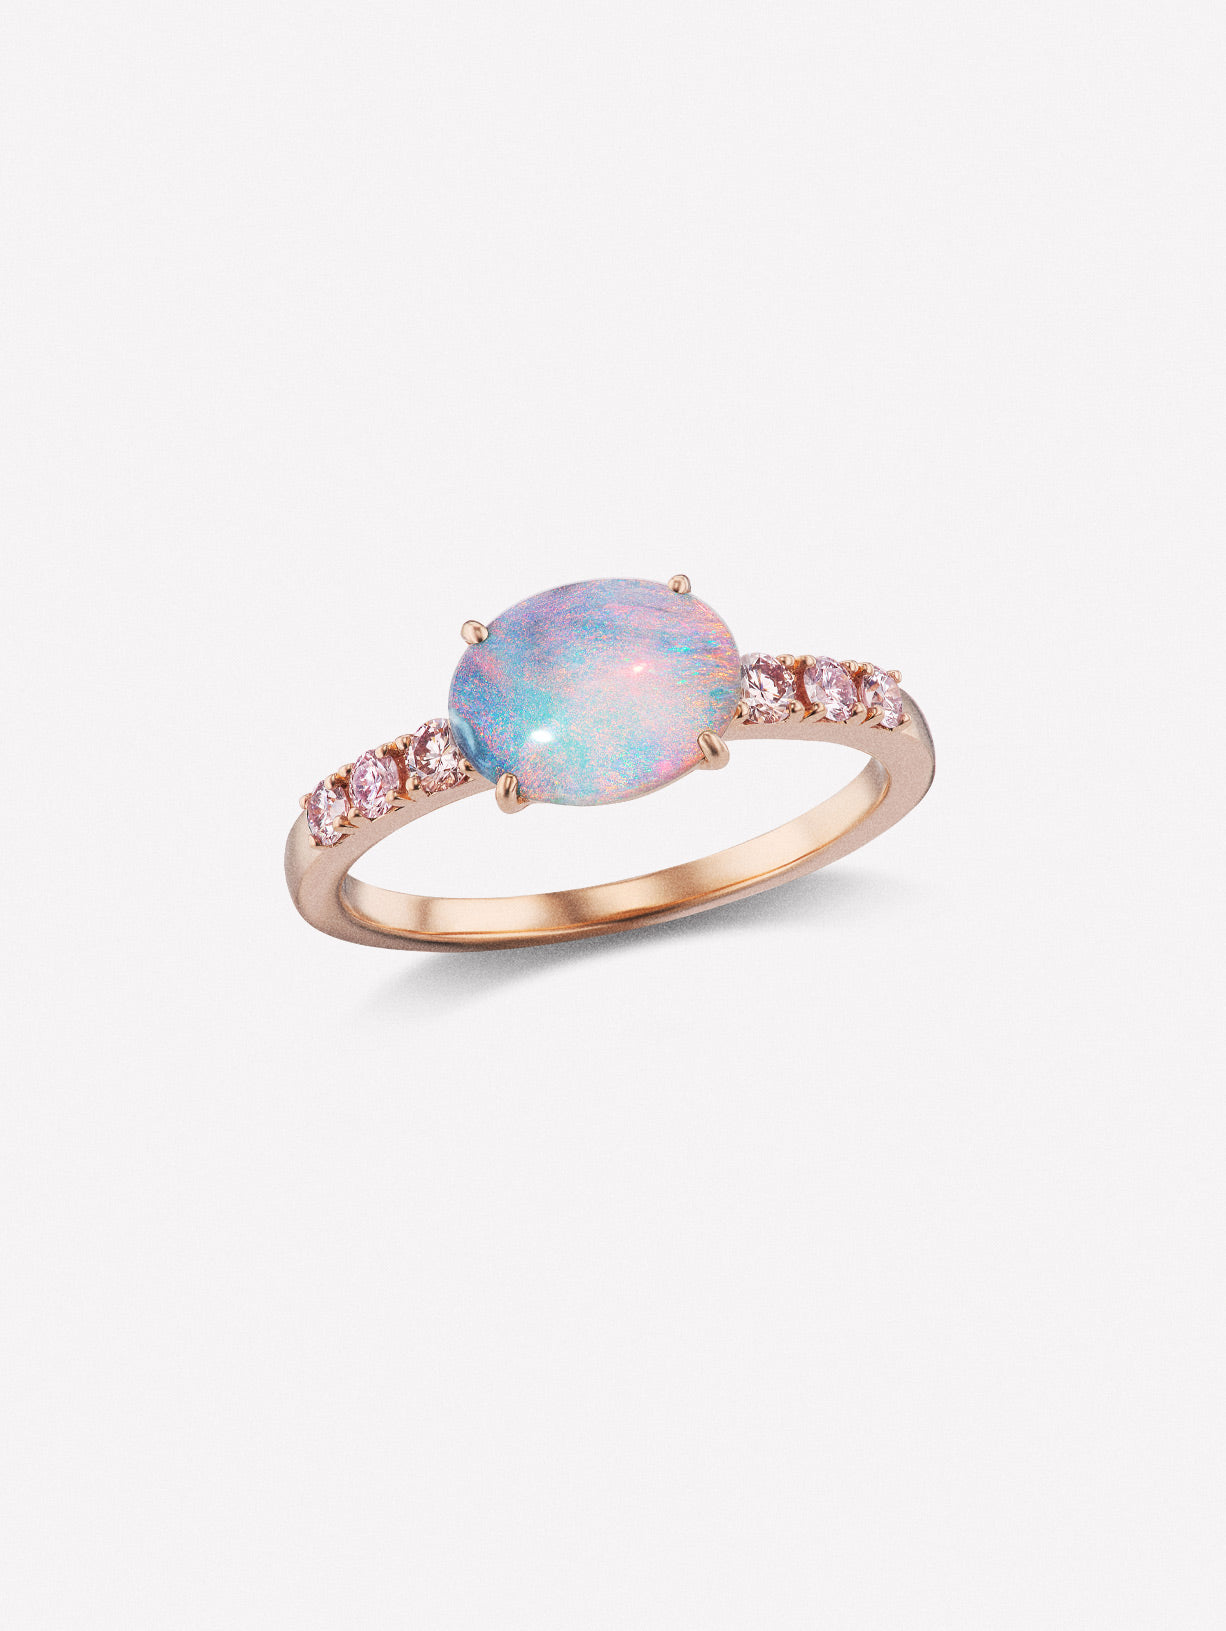 Argyle Pink™ Diamond and Opal Stacking Ring - Pink Diamonds, J FINE - J Fine, Rings - Pink Diamond Jewelry, argyle-pink™-diamond-and-opal-stacking-ring-by-j-fine-4 - Argyle Pink Diamonds